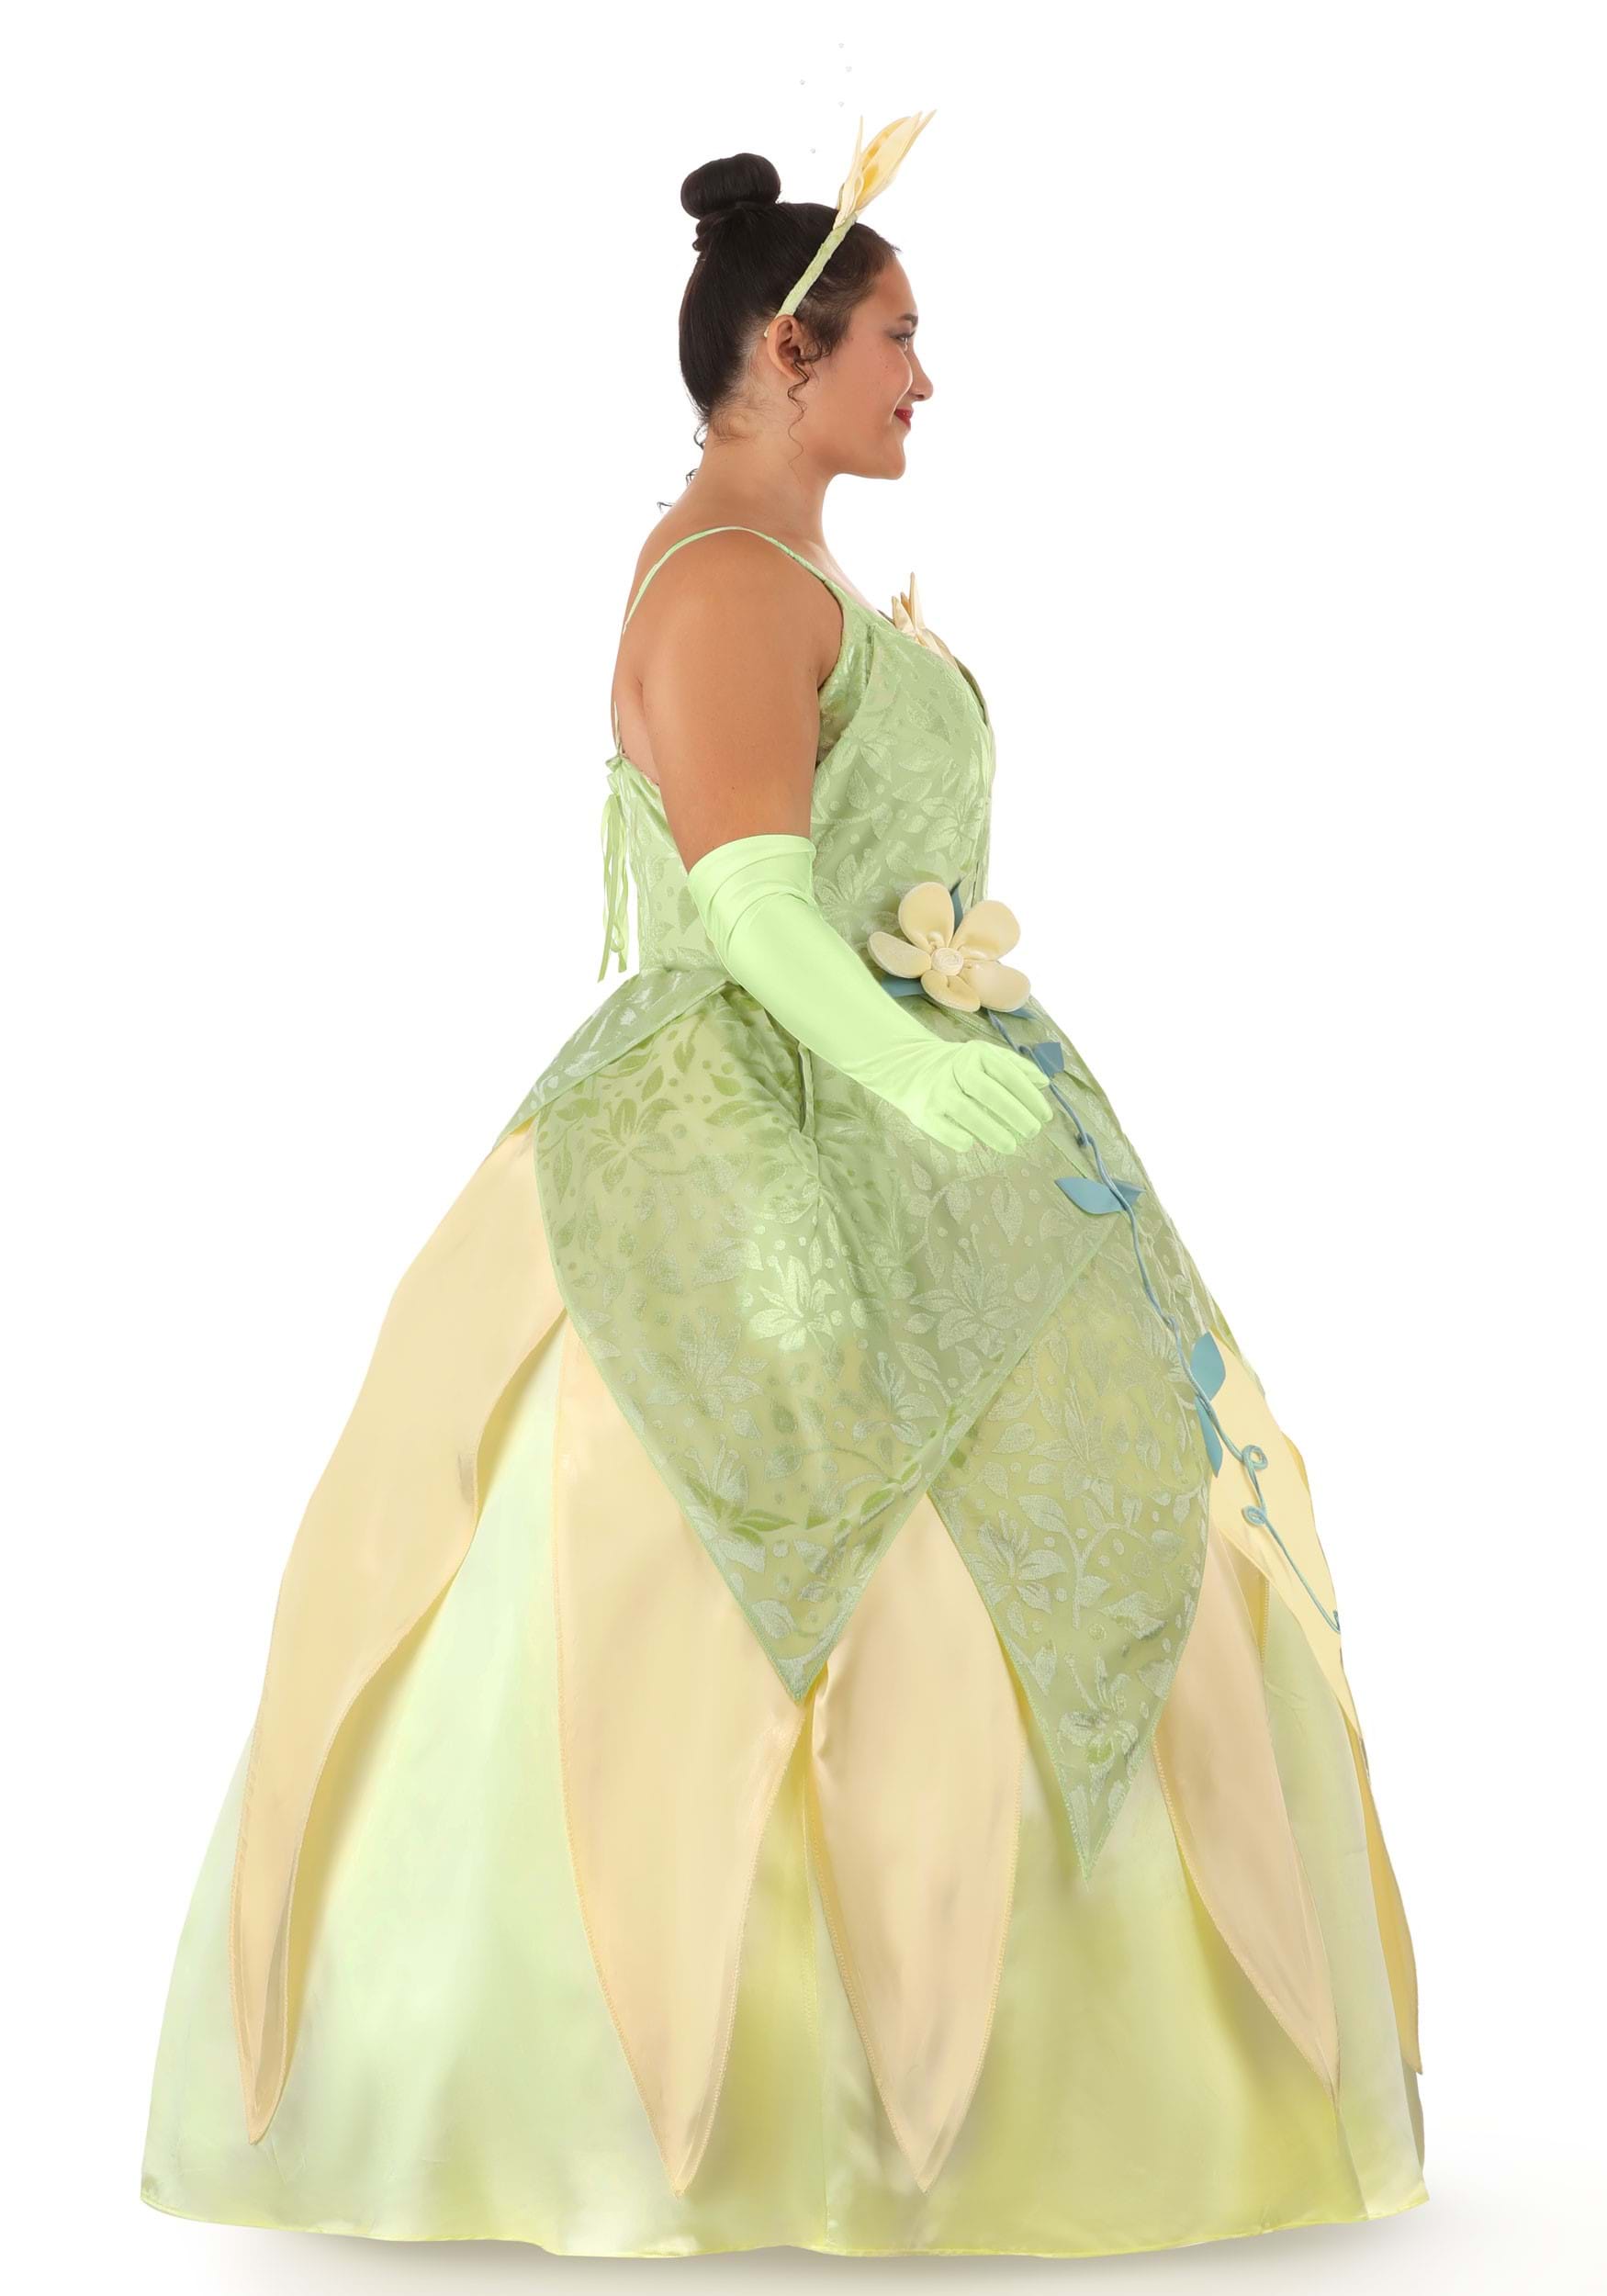 Plus Size Deluxe Disney Women's Princess and the Frog Tiana Costume